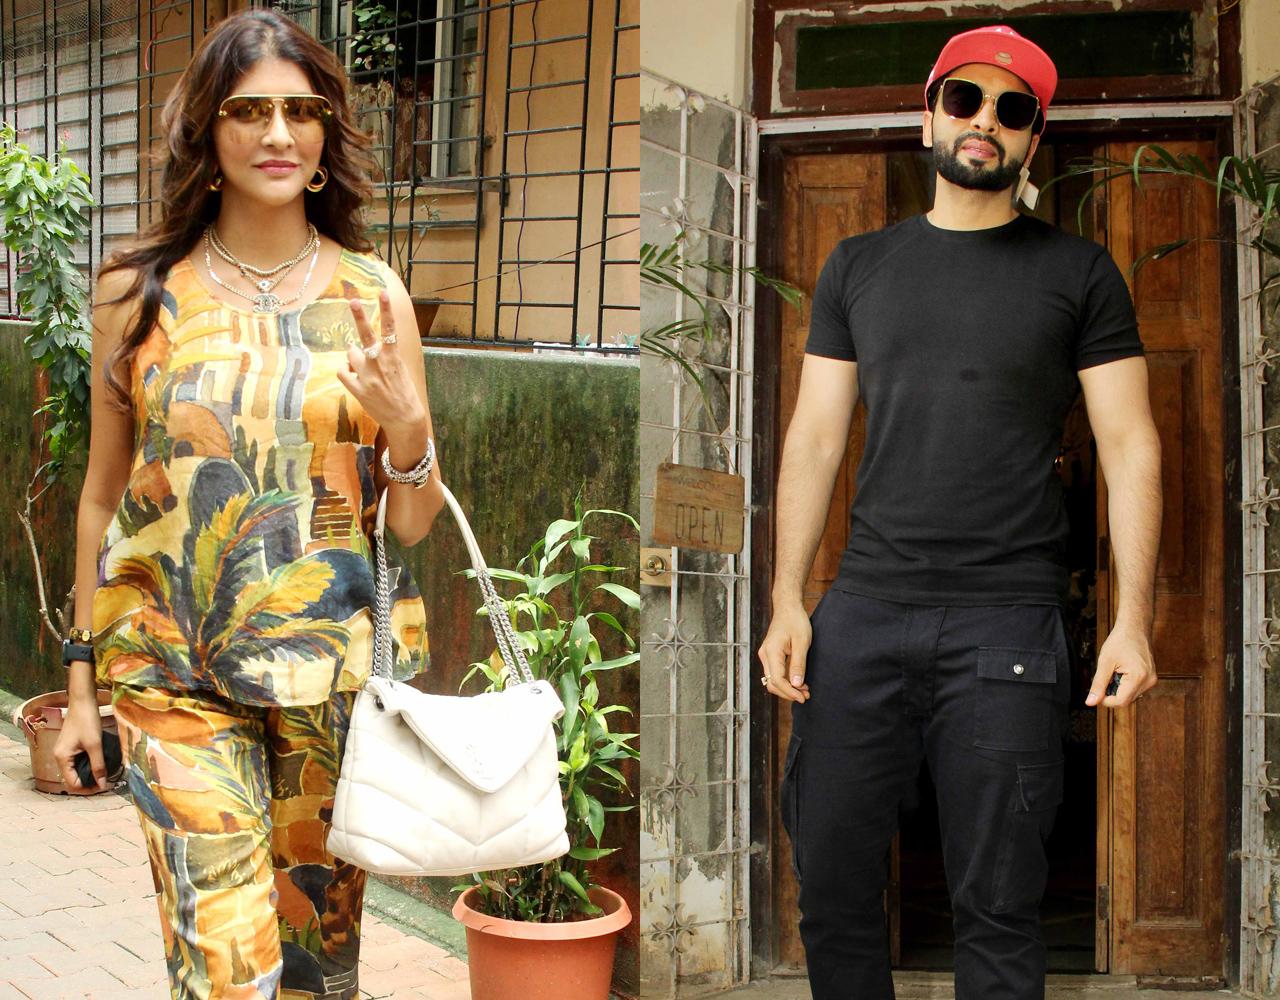 South actress Lakshmi Manchu and actor-producer Jackky Bhagnani were also among the attendees of the birthday lunch. For the unversed, Rakul Preet Singh and Lakshmi Manchu are very close and often spend time together.